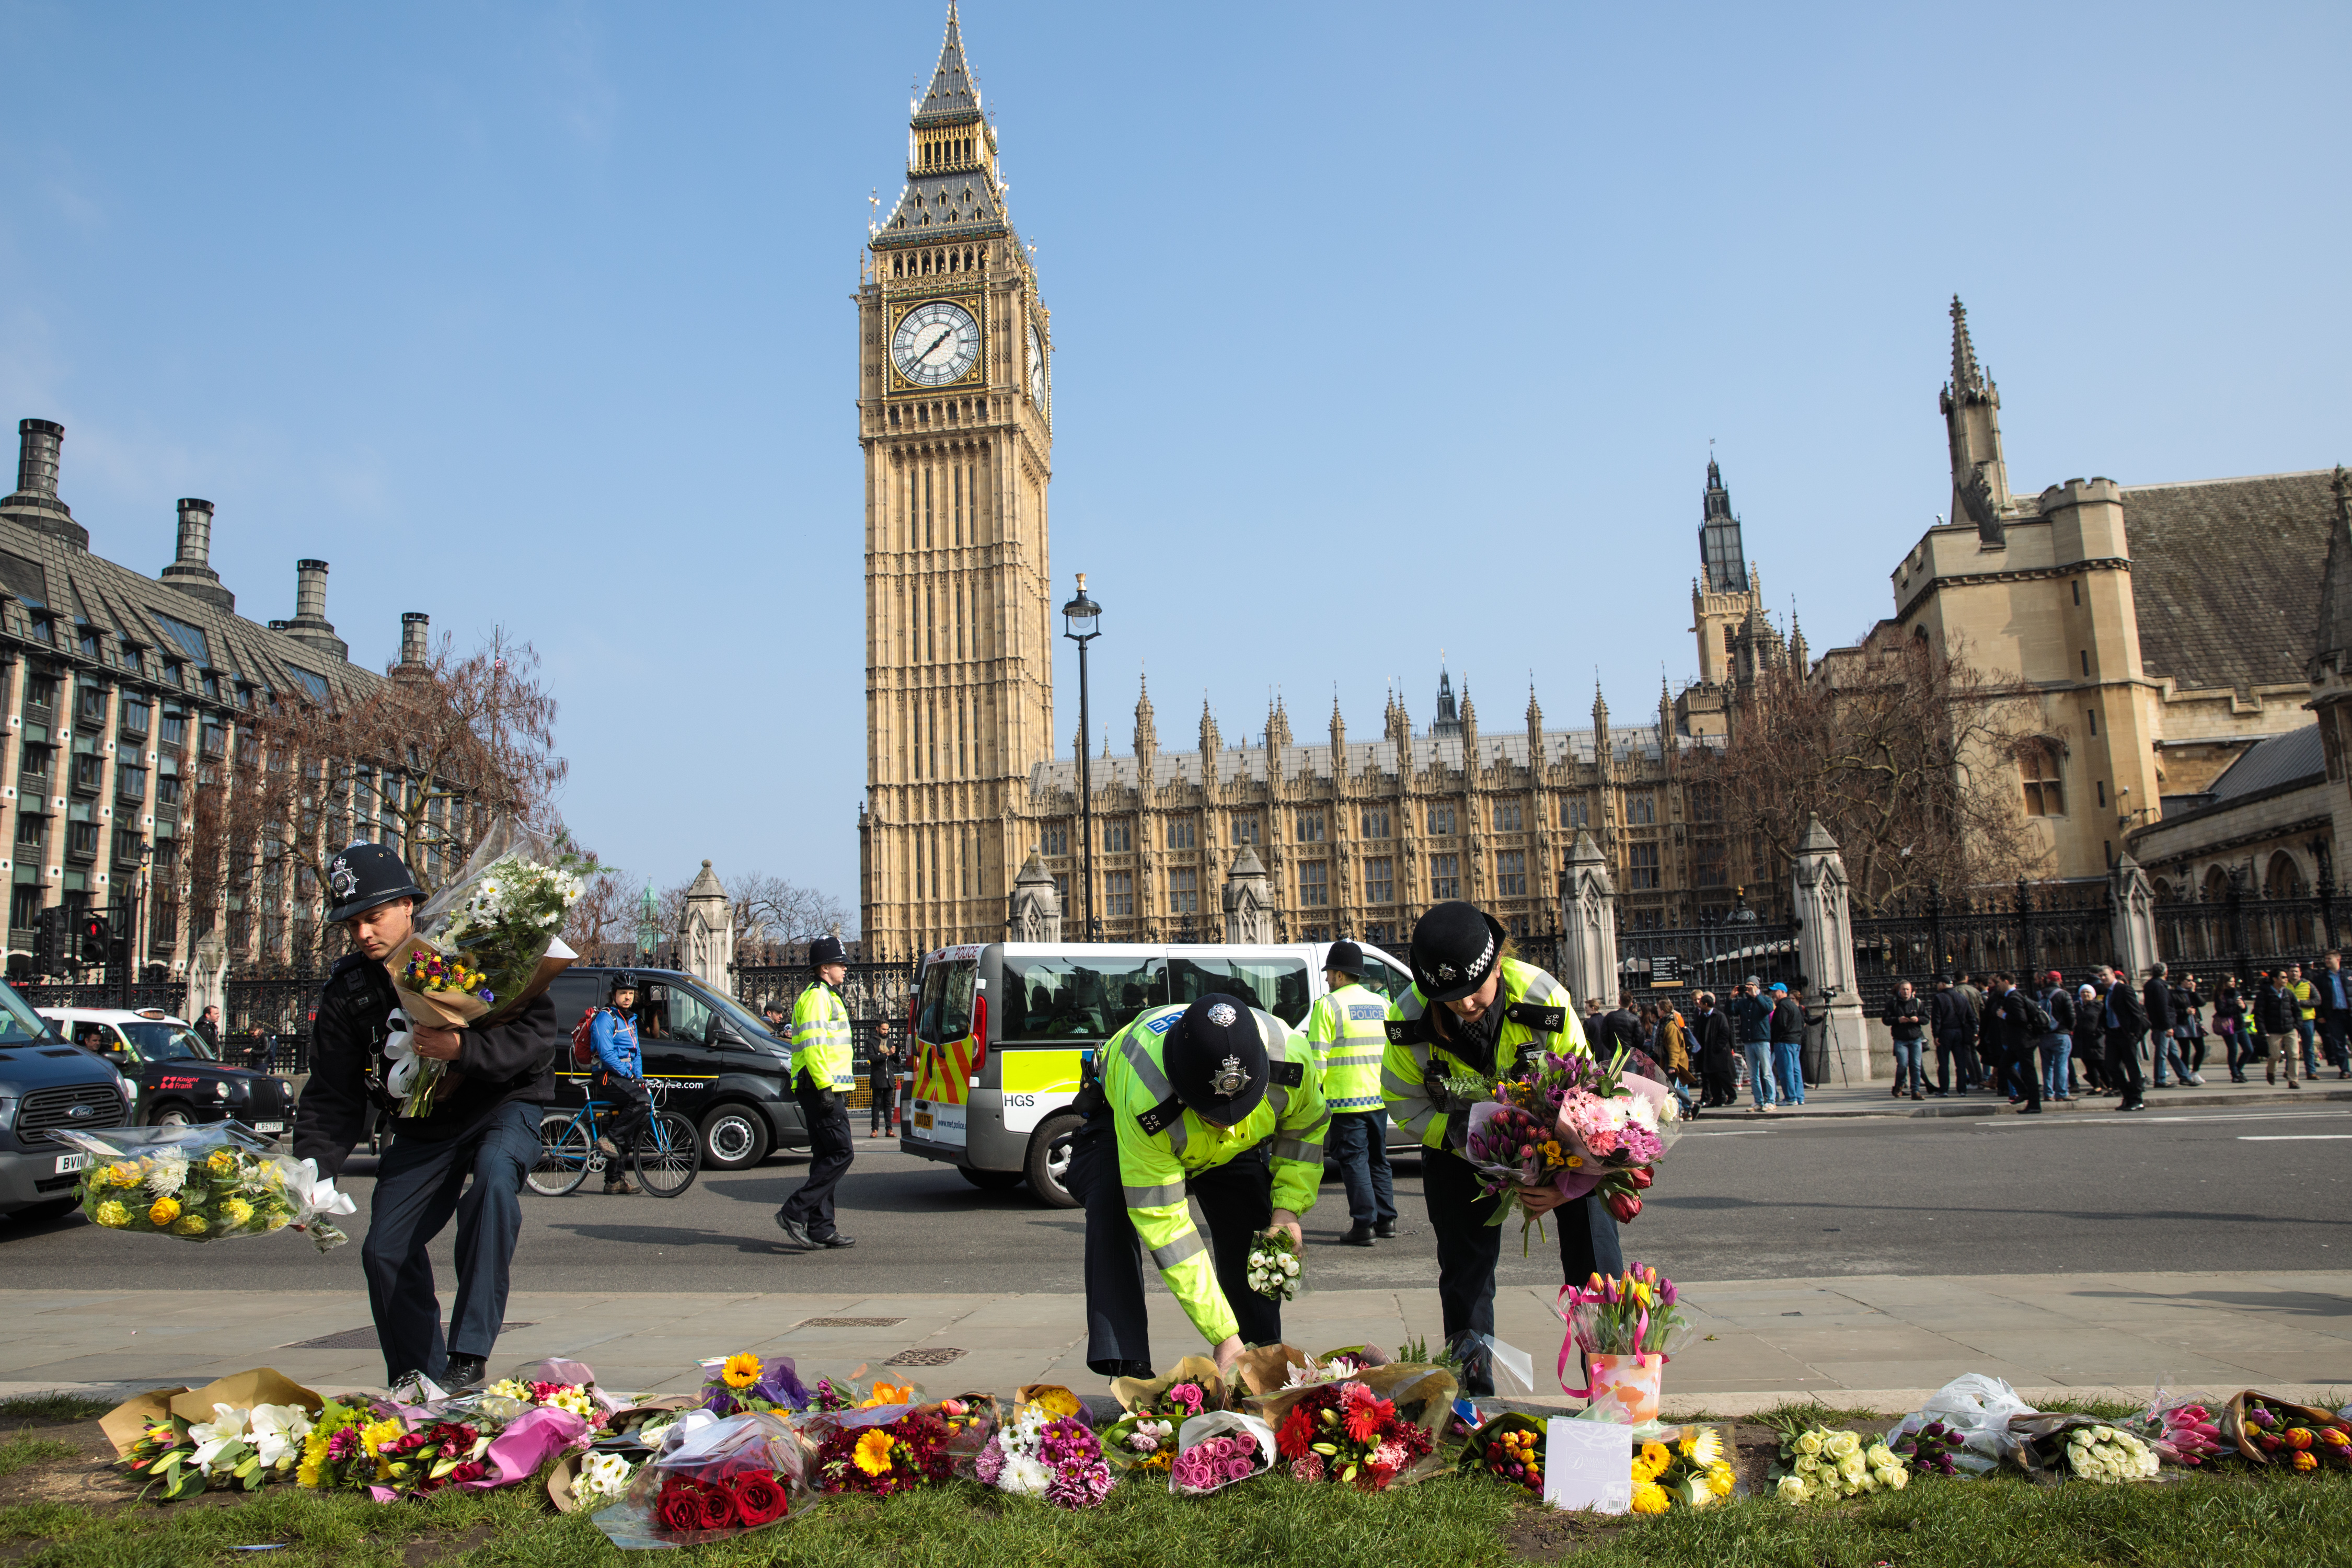 Police officers move floral tributes from outside the Houses of Parliament to Parliament Square after the March 22, 2017, attack on Westminster in London (Jack Taylor&mdash;Getty Images)